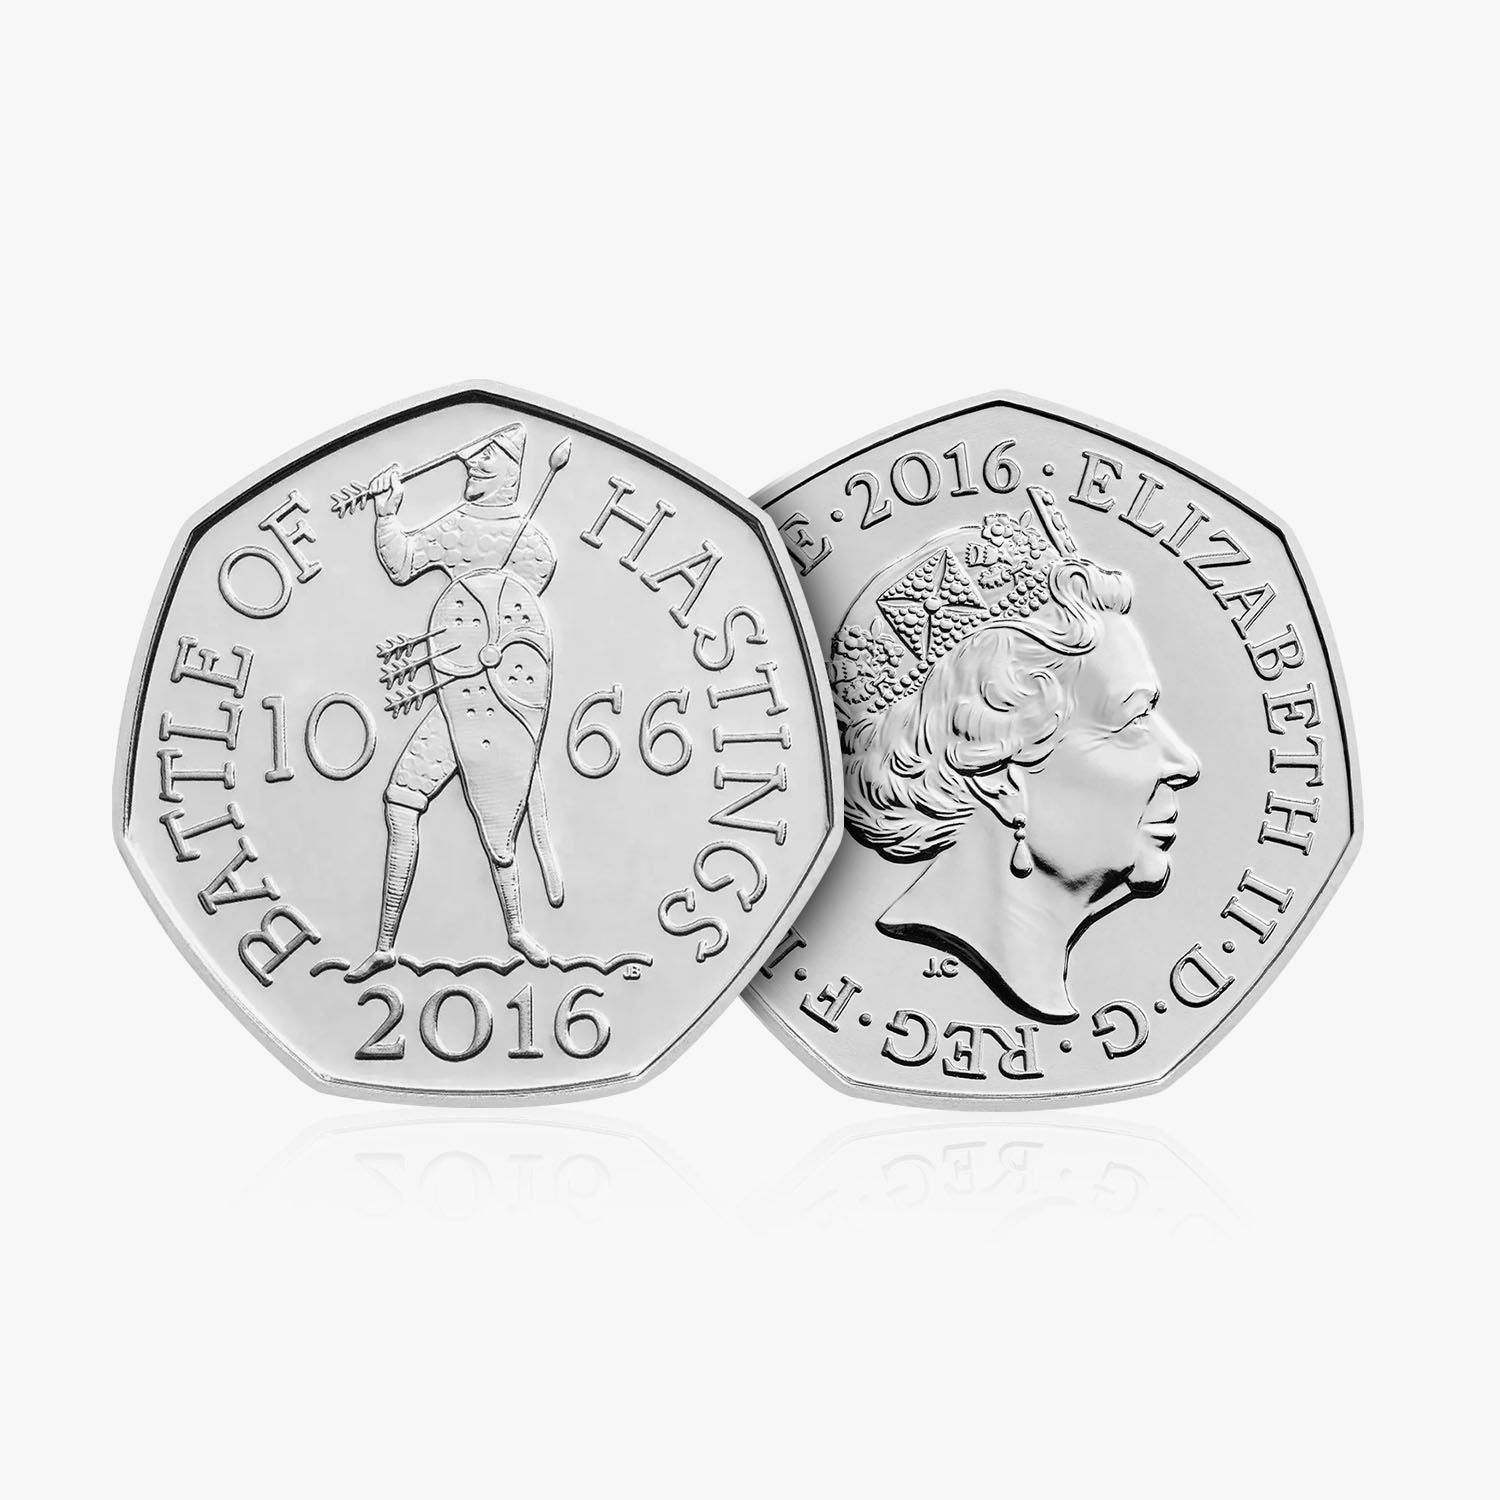 2016 Circulated Battle Of Hastings 950th Anniversary 50p Coin